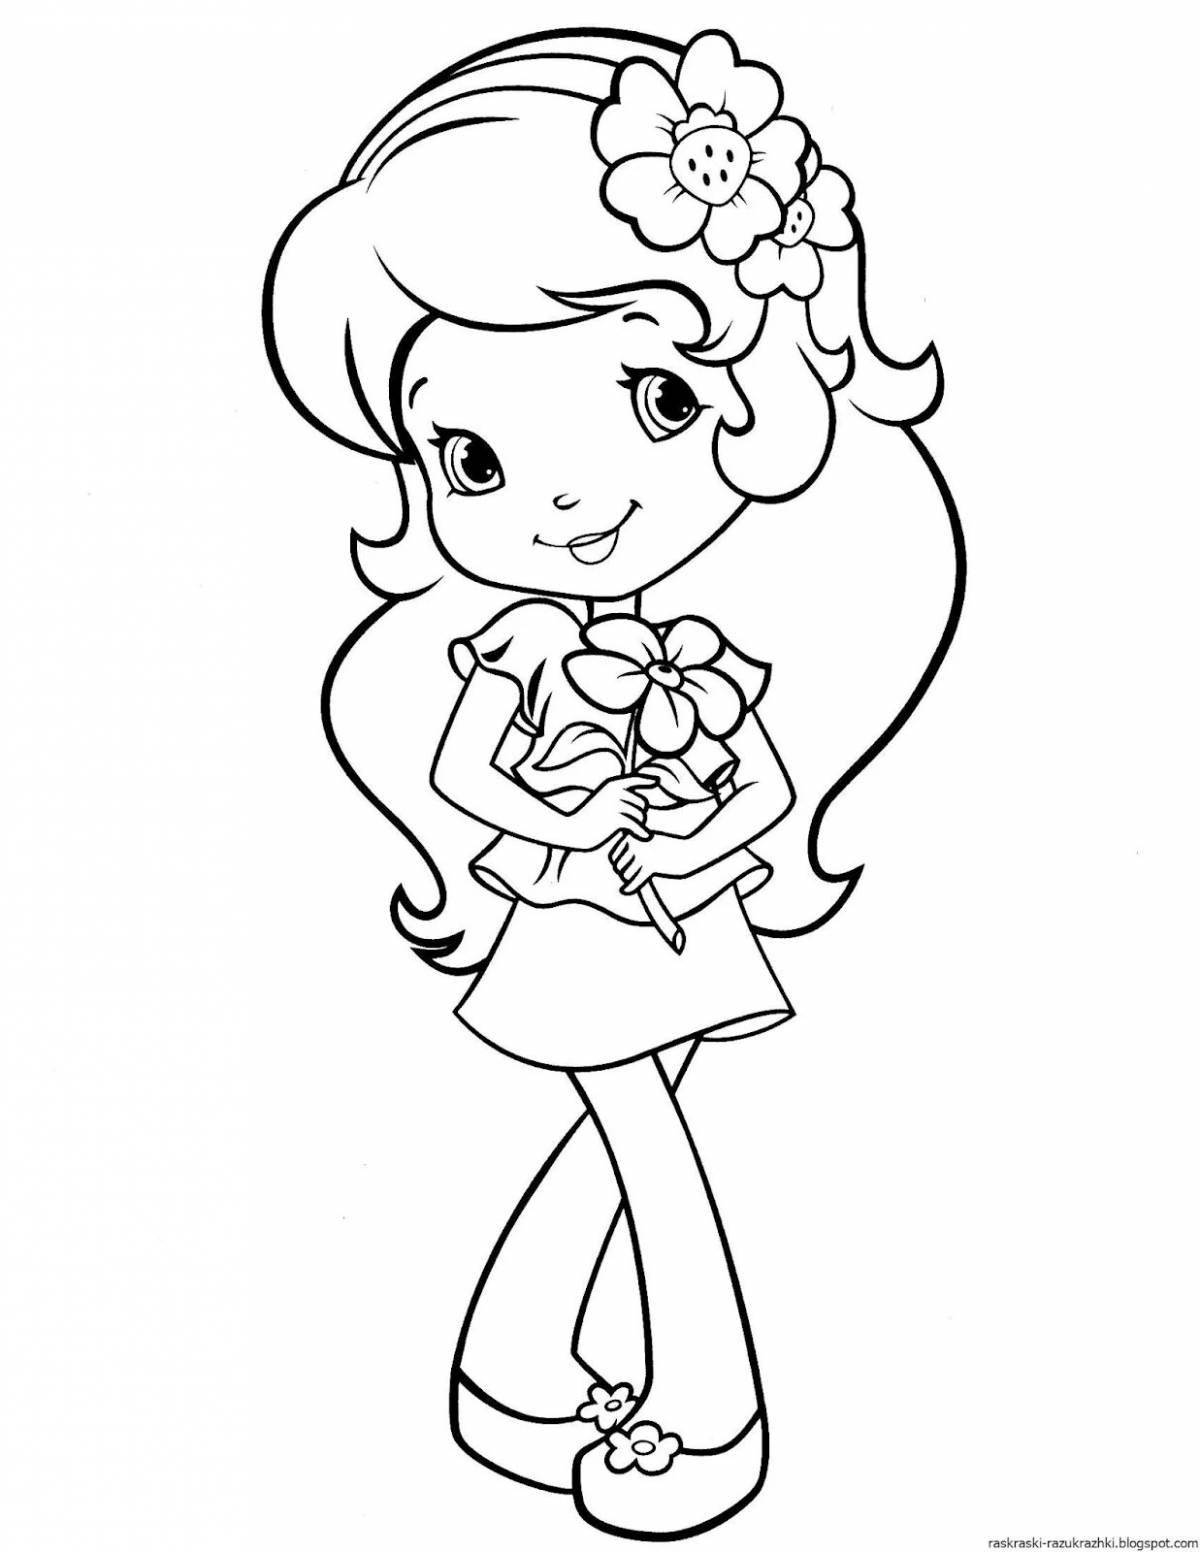 Awesome little girls coloring pages